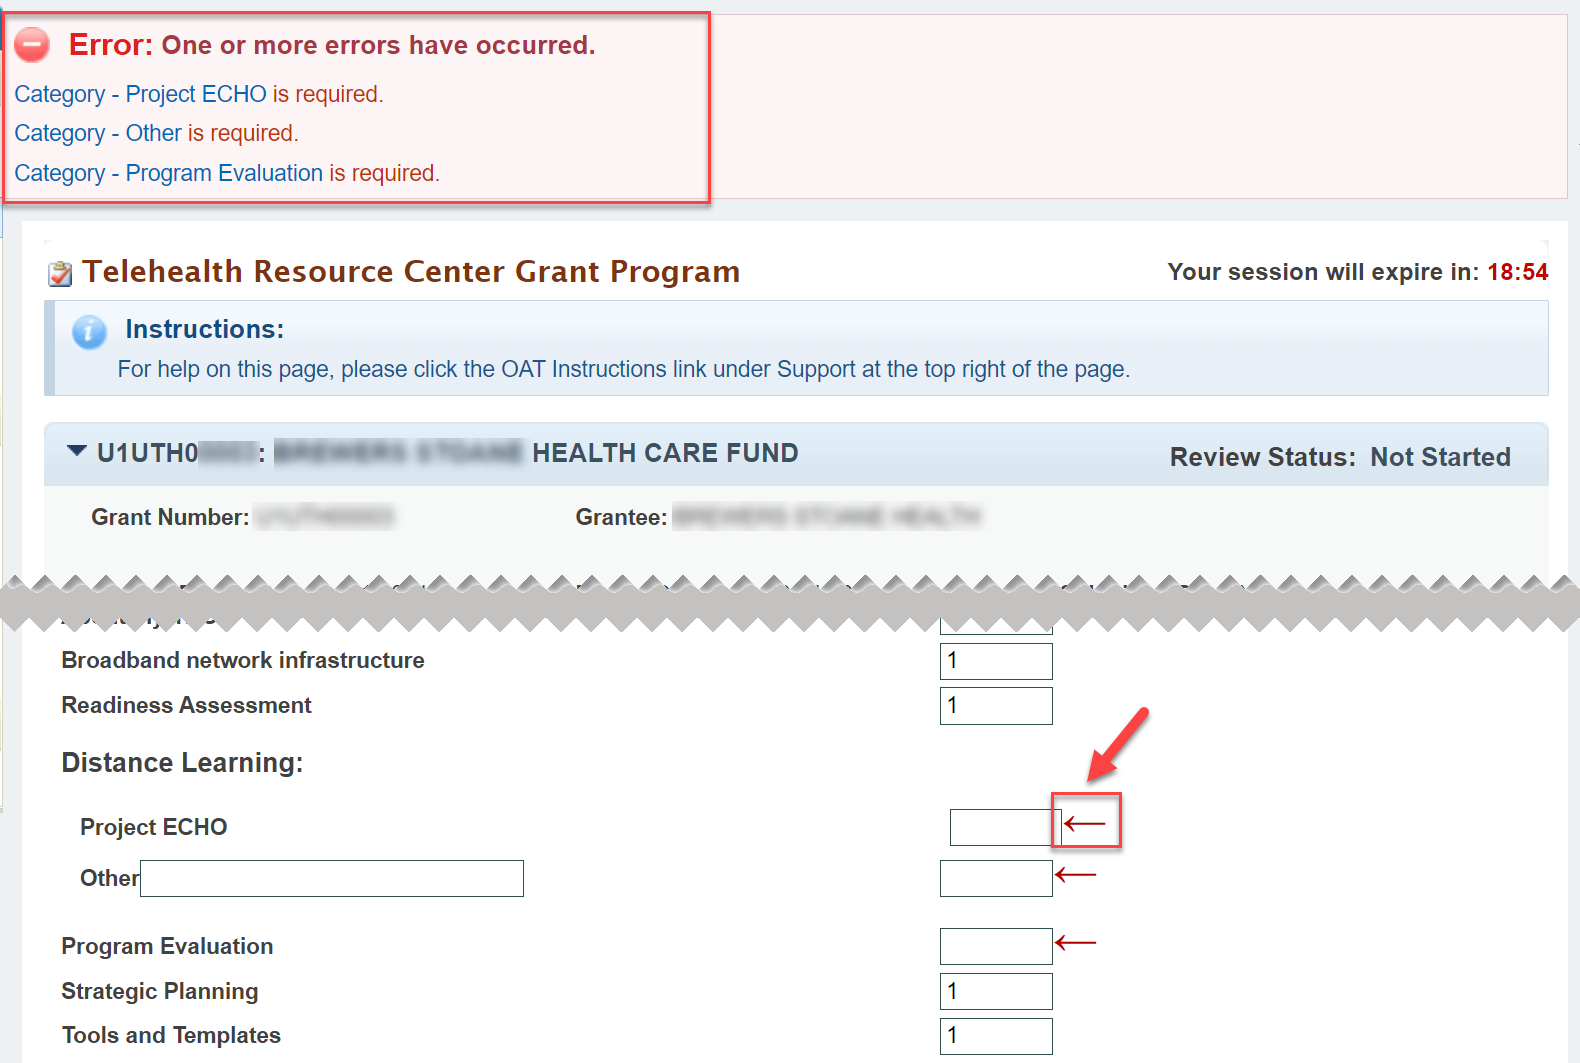 Screenshot of the TRC Grant Program page showing errors